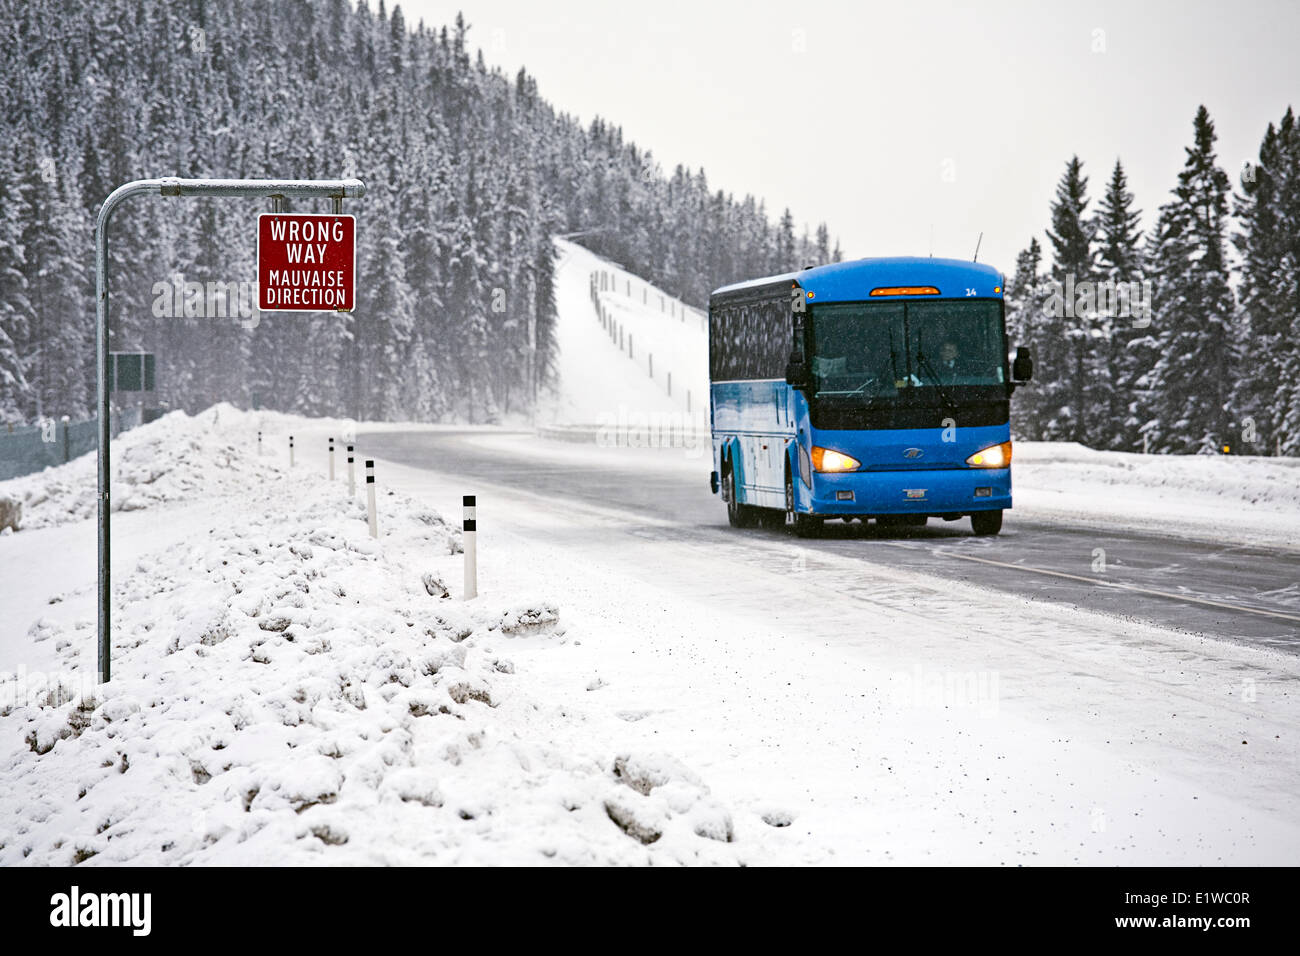 Wrong way sign and tour bus on Trans-Canada Highway in winter conditions near Lake Louise, Banff, Albert, Canada Stock Photo